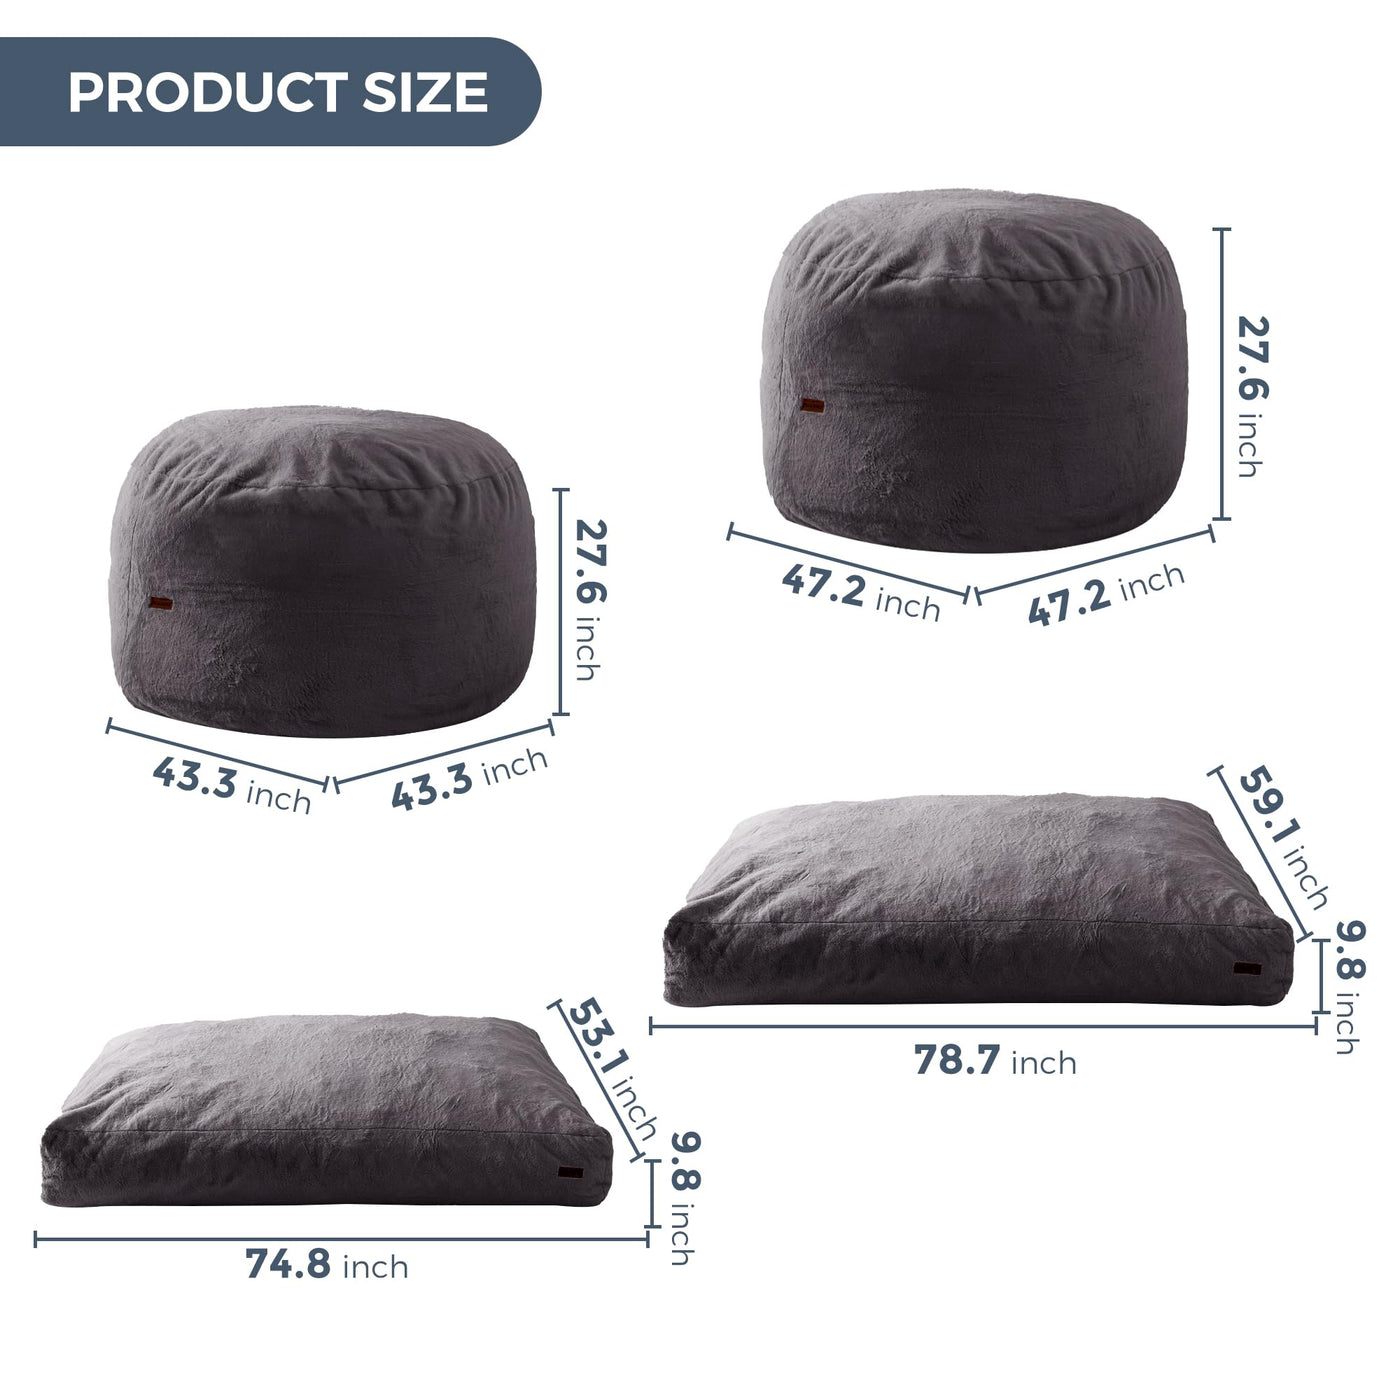 MAXYOYO Giant Bean Bag, Faux Fur Convertible Beanbag Folds from Lazy Chair to Floor Mattress Bed, Dark Grey